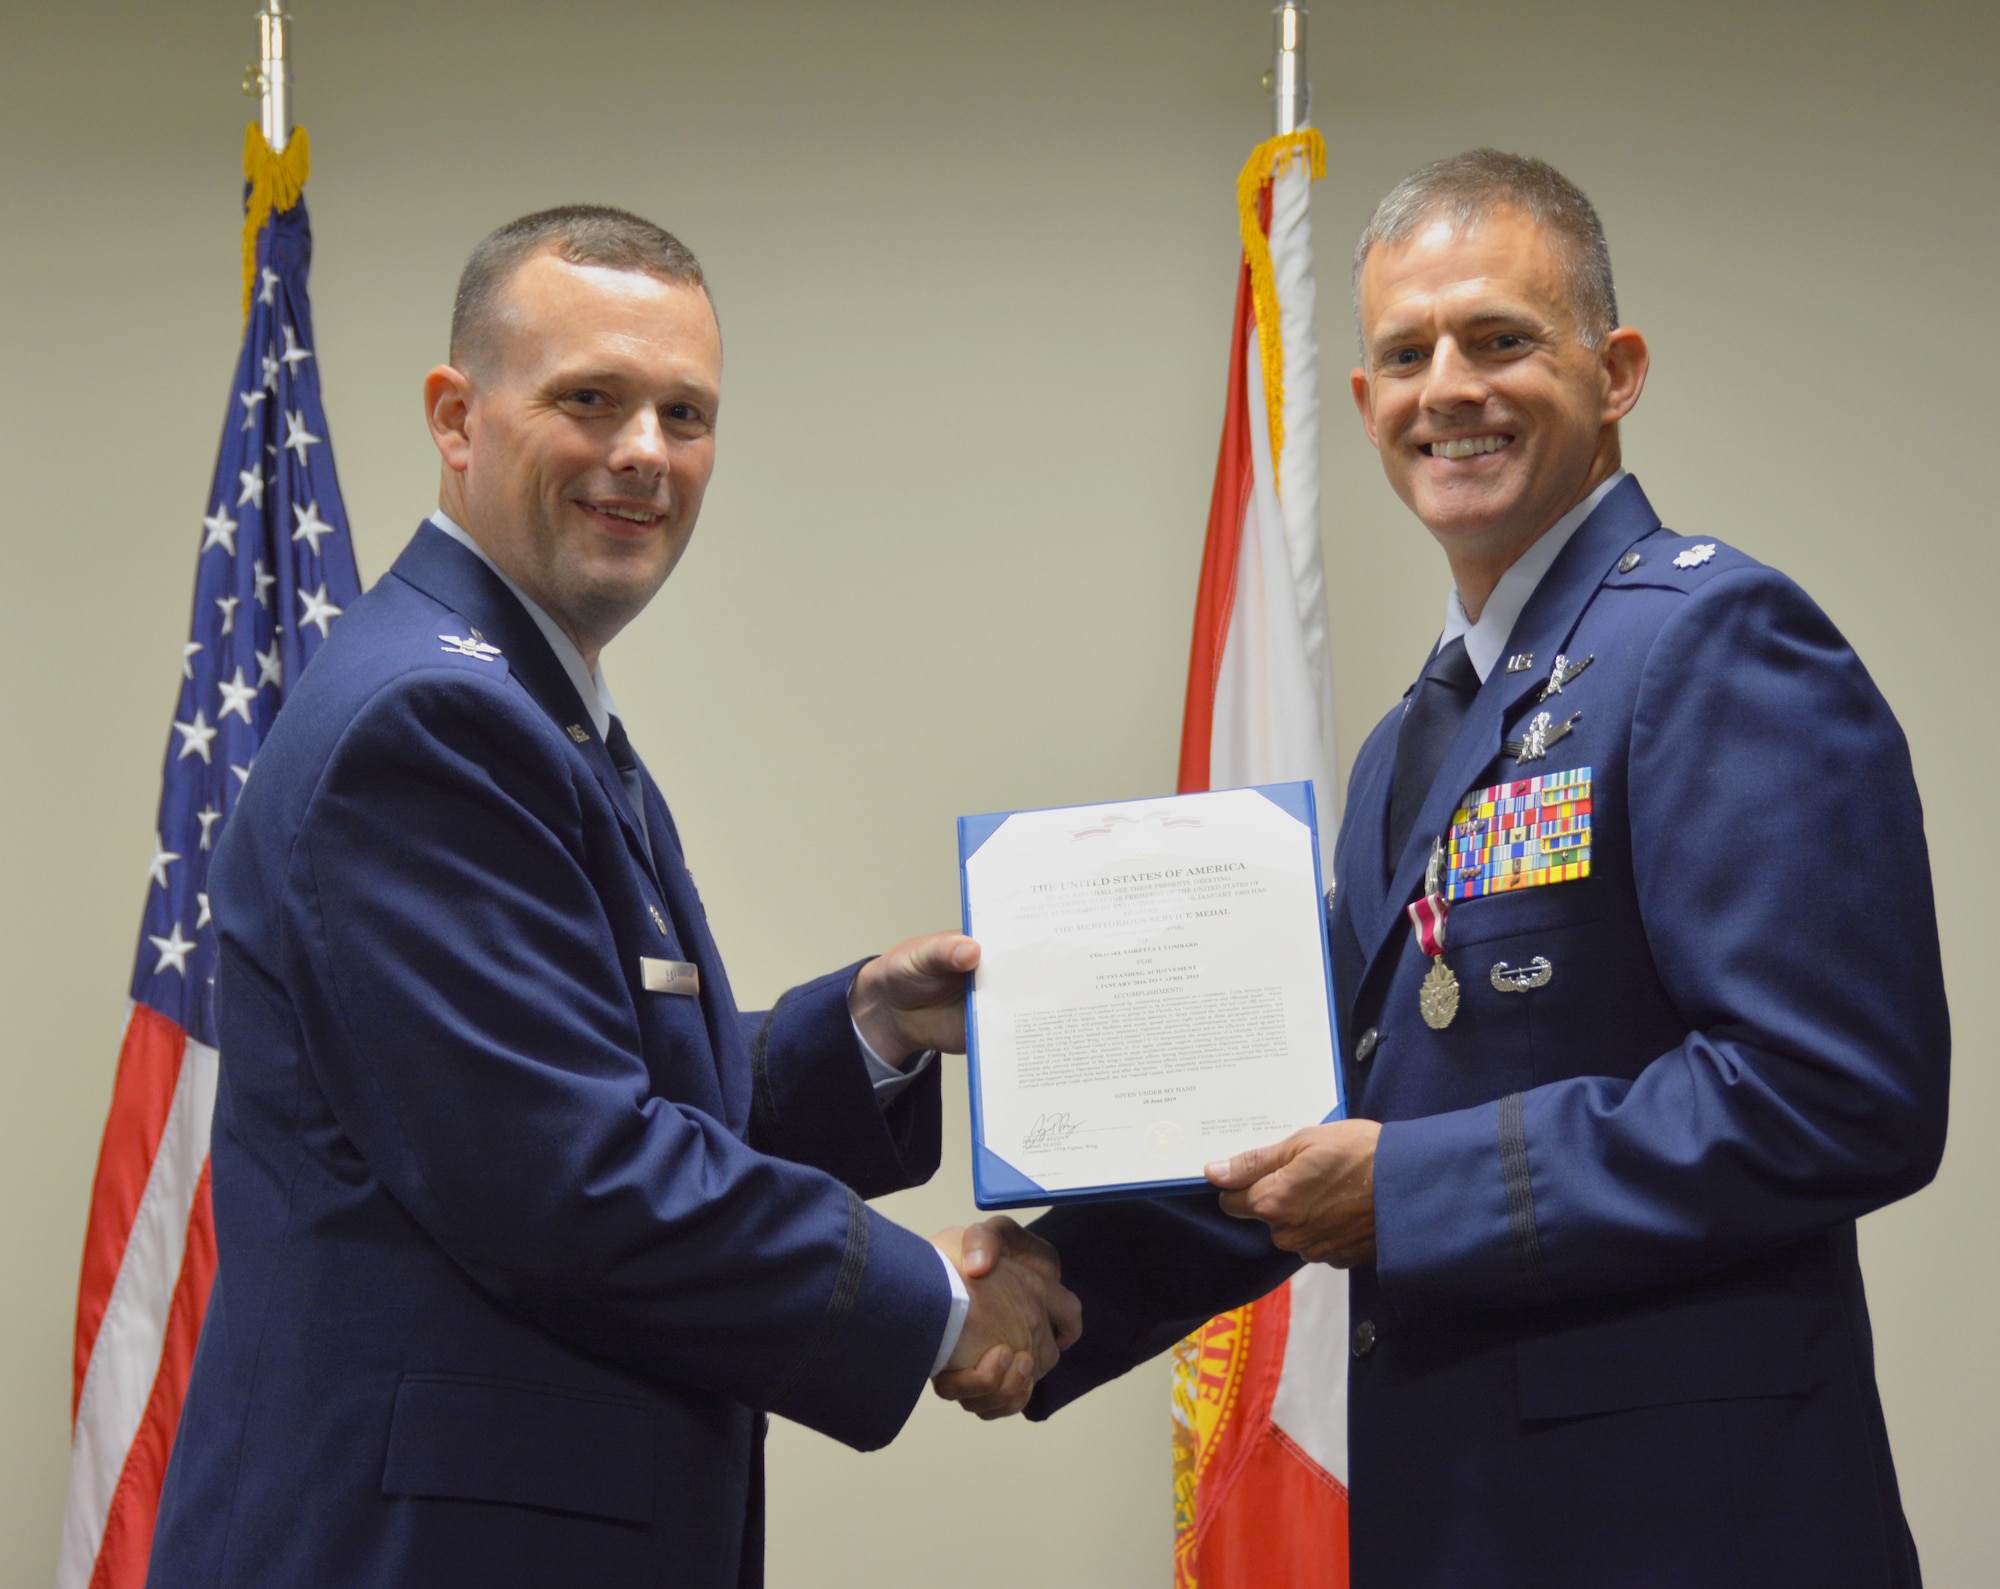 New commander is "fired up" to lead 125 CF